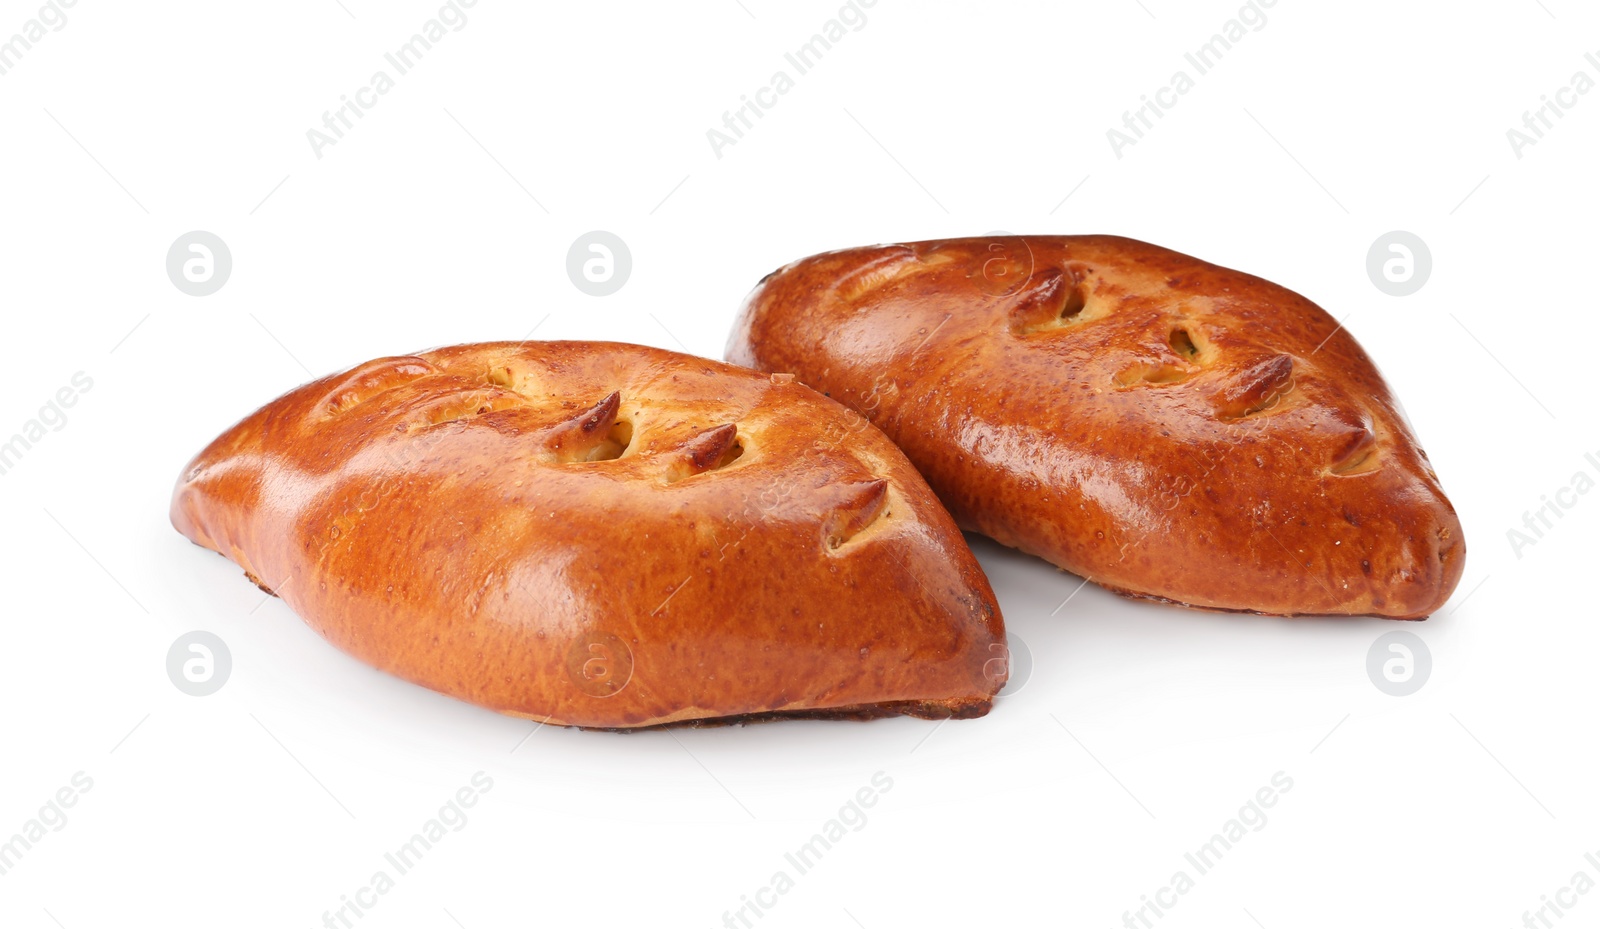 Photo of Two delicious baked patties on white background